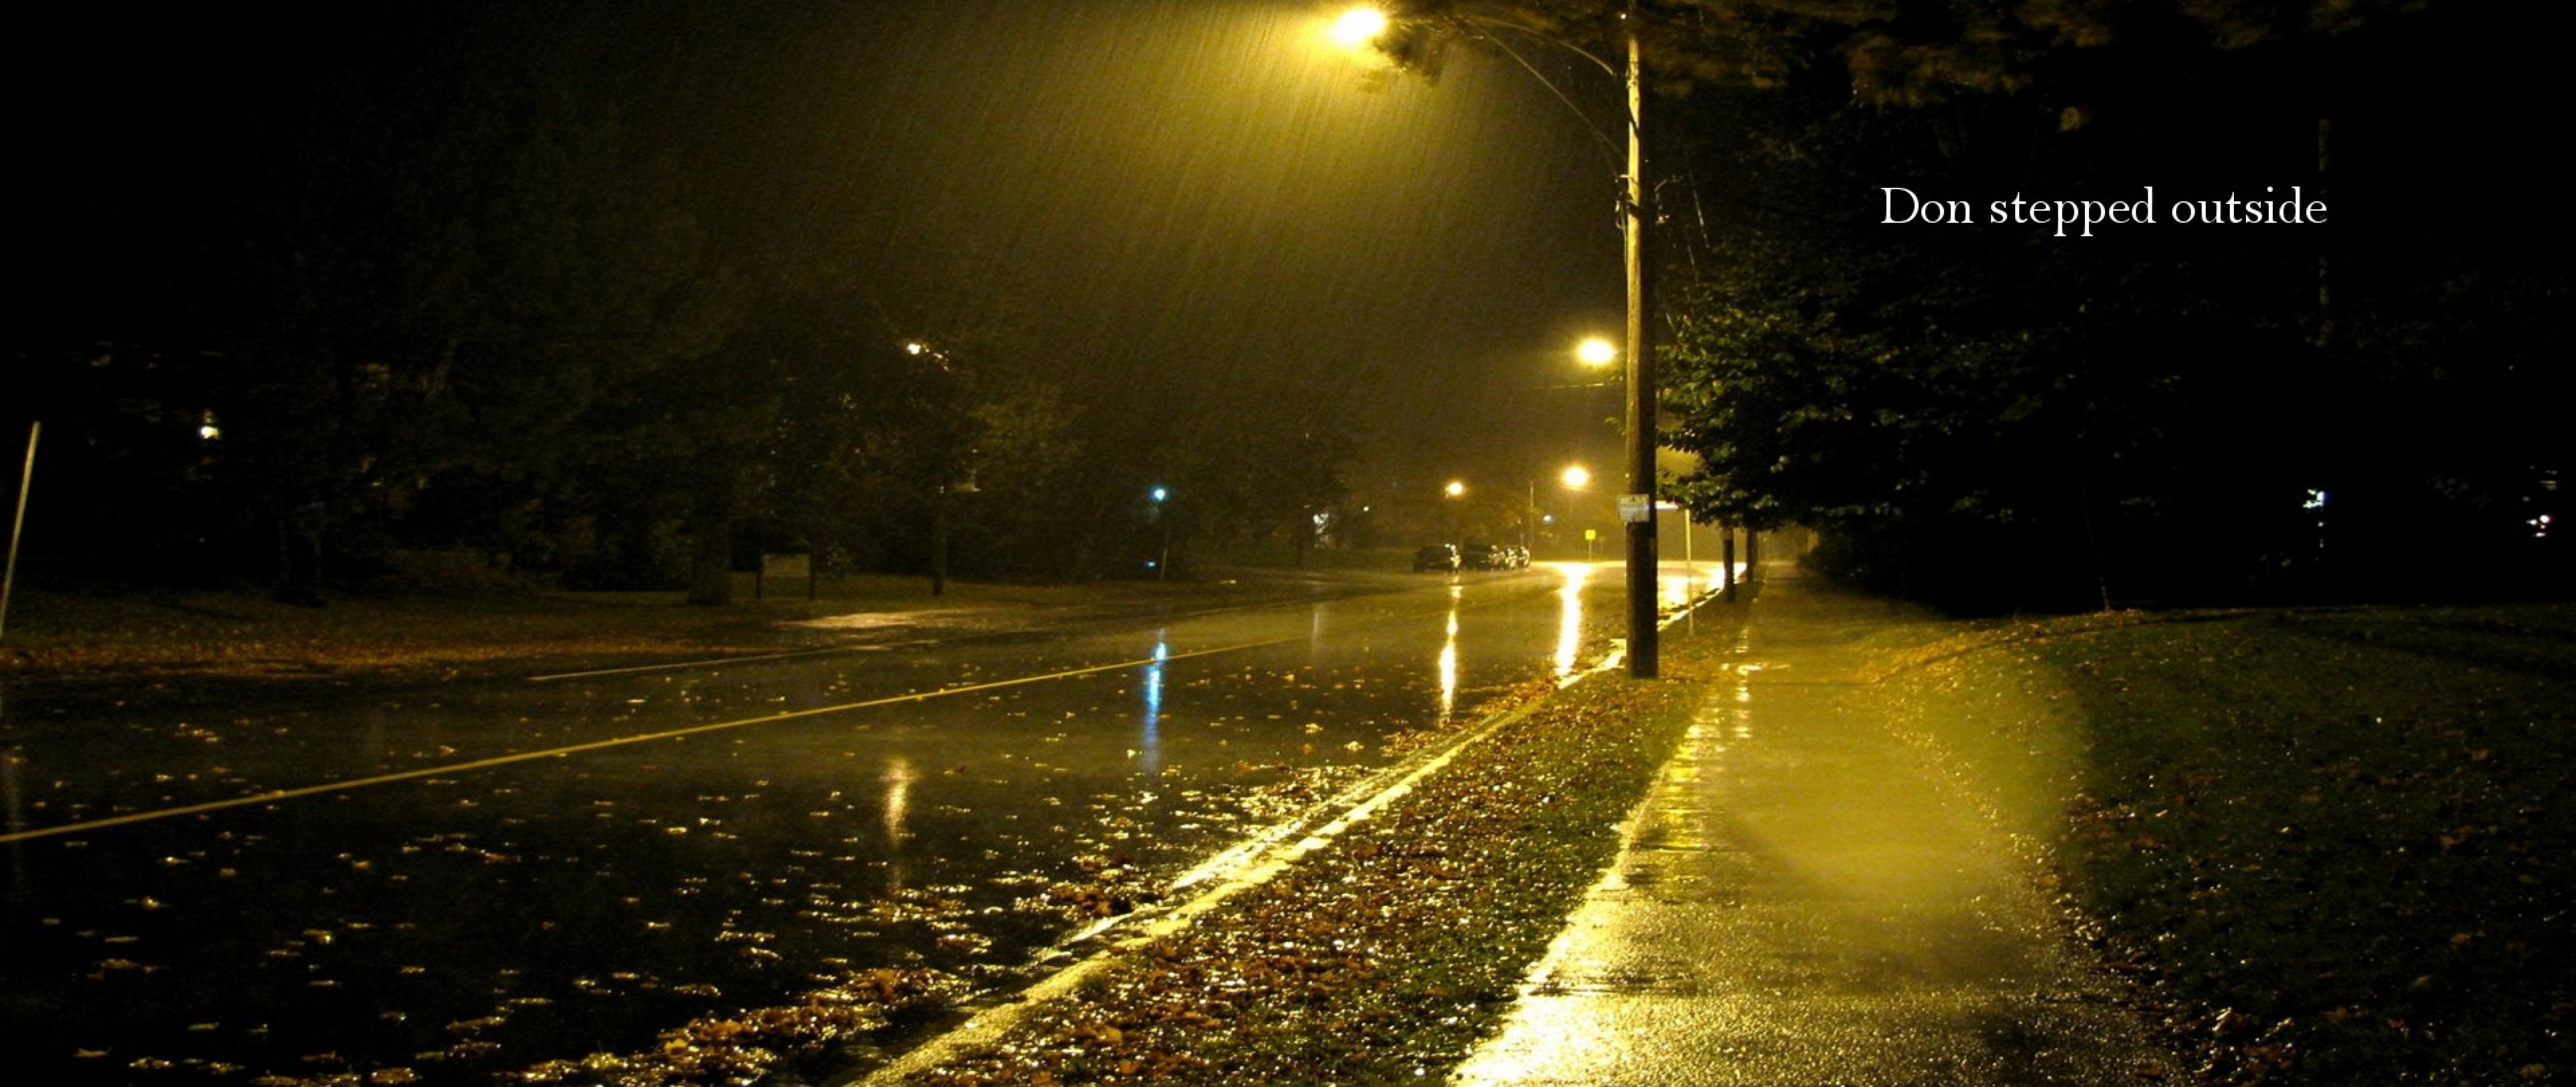 Free Download Rainy Street At Night Hd Wallpaper 4k Ultra Hd Wide Tv Hd [5120x2160] For Your